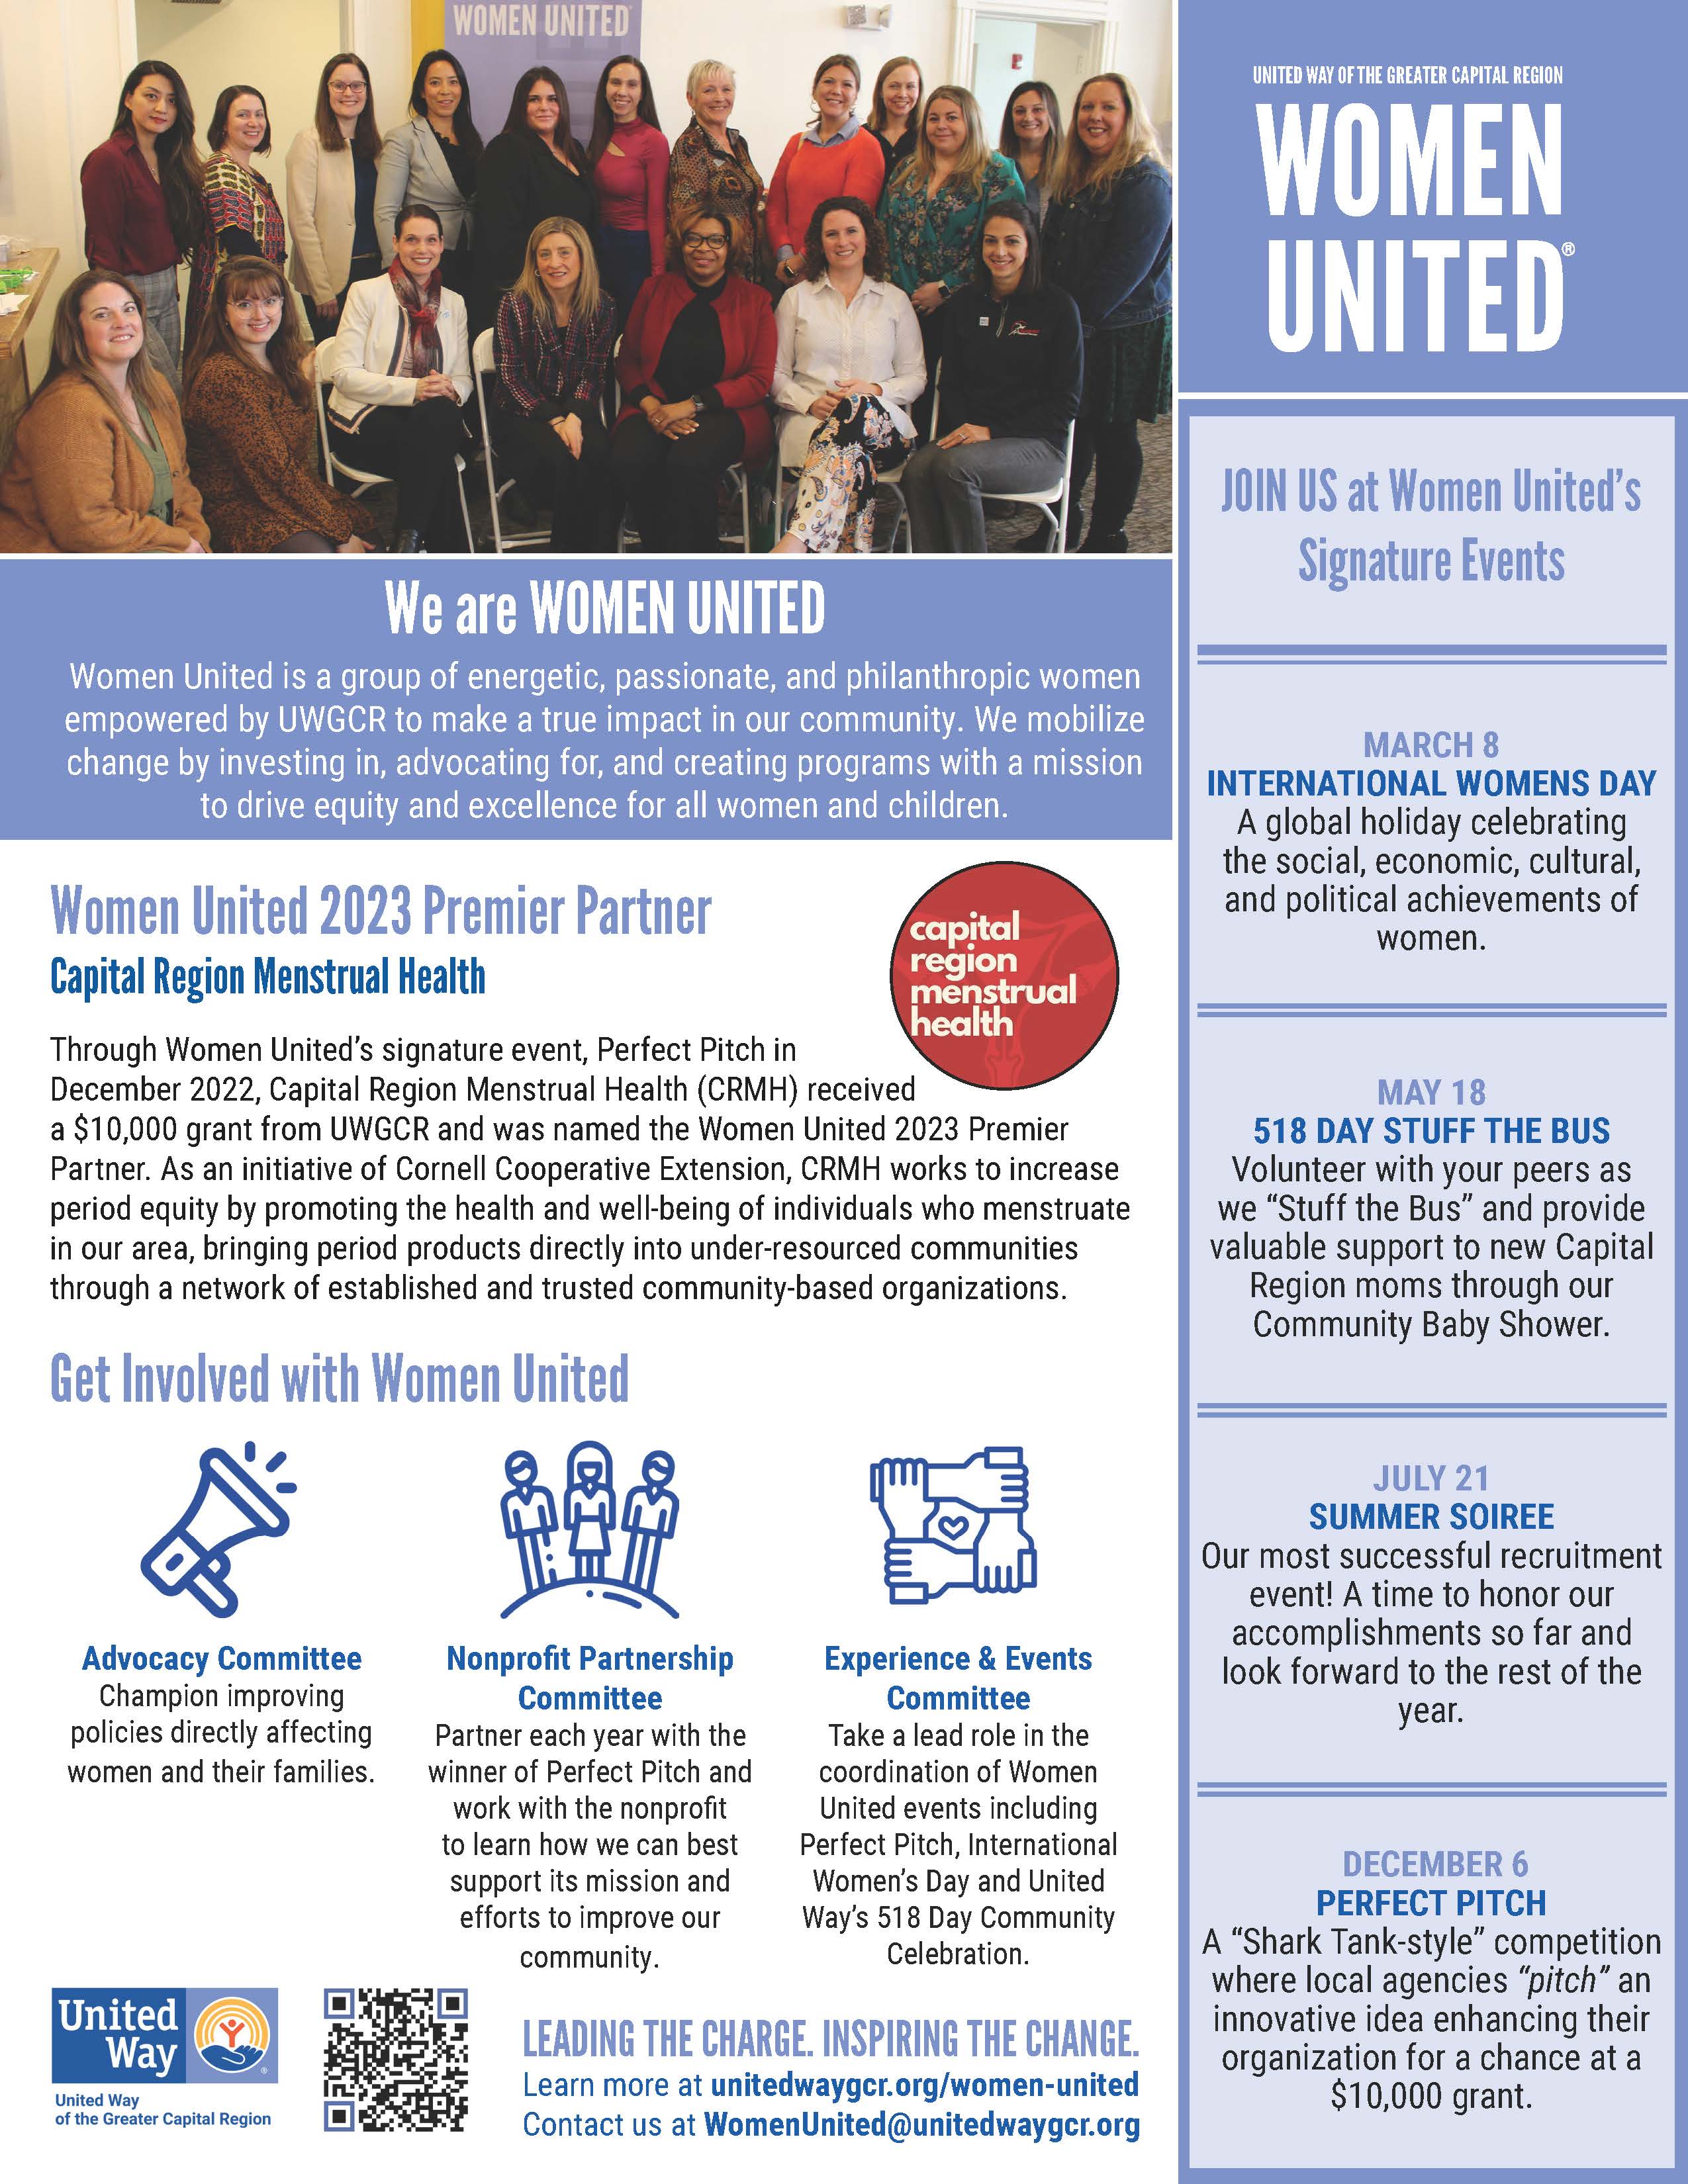 Women United Overview